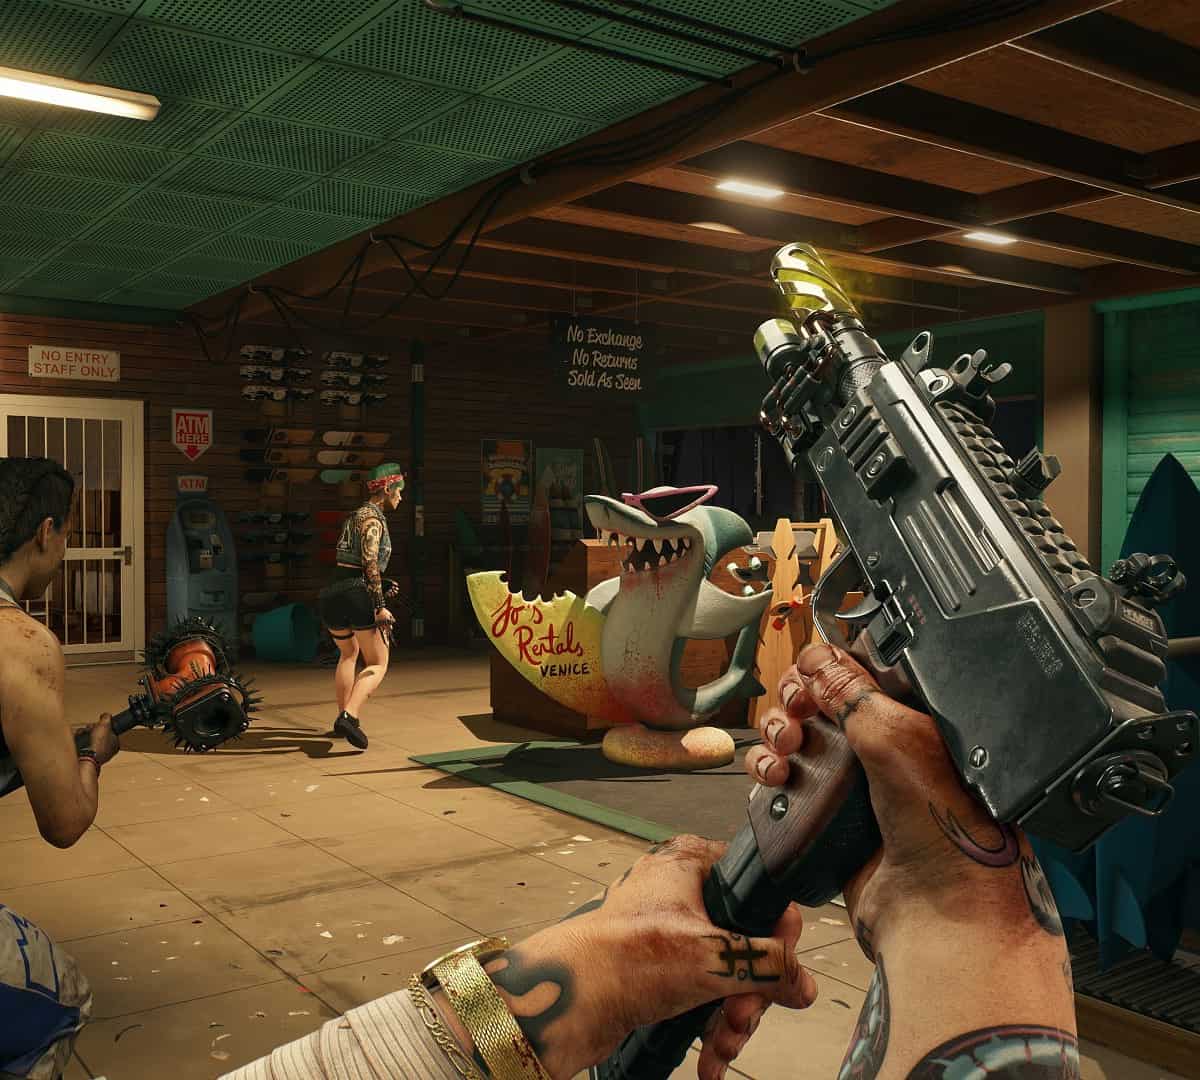 Dead Island 2 legendary weapons: The player holding a machine pistol in co-op with two other players.